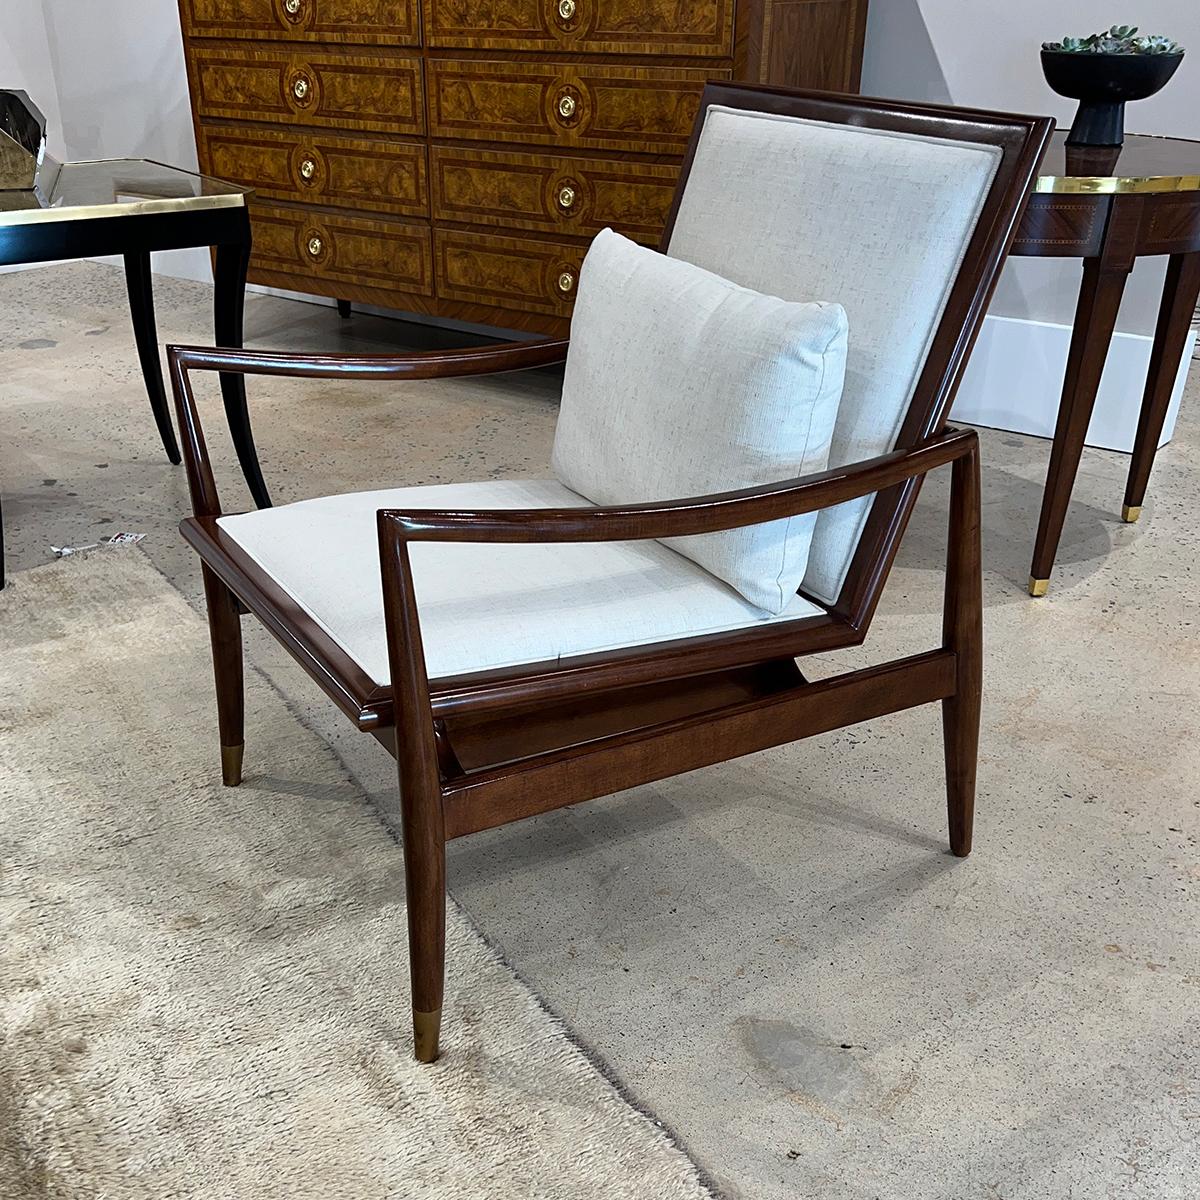 In a warm brown polished walnut finish. With an upholstered cushion backrest and seat in a Linen performance fabric. 

The classic modern and graceful frame with an angled back and swooping arms, with brass caps to the legs.

Dimensions: 26